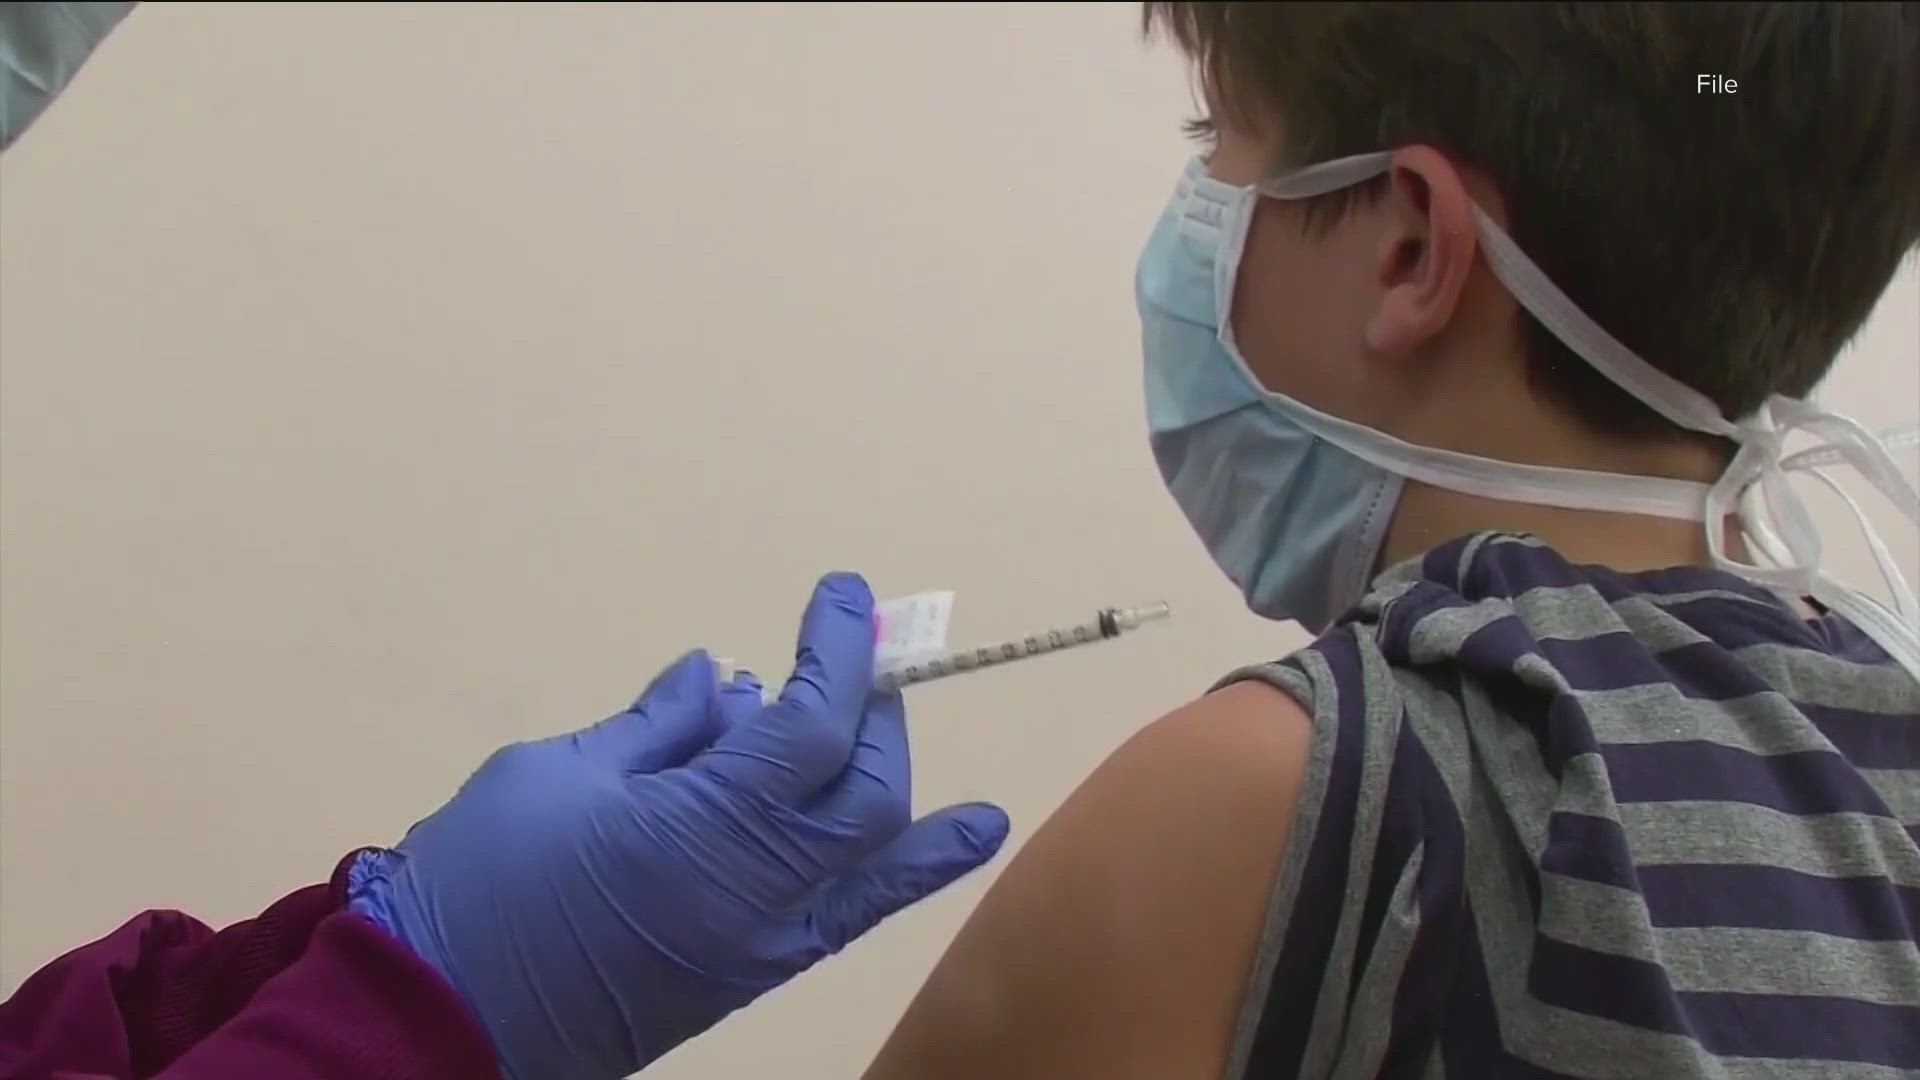 One local pharmacist says the respiratory virus is more manageable today because of vaccinations.